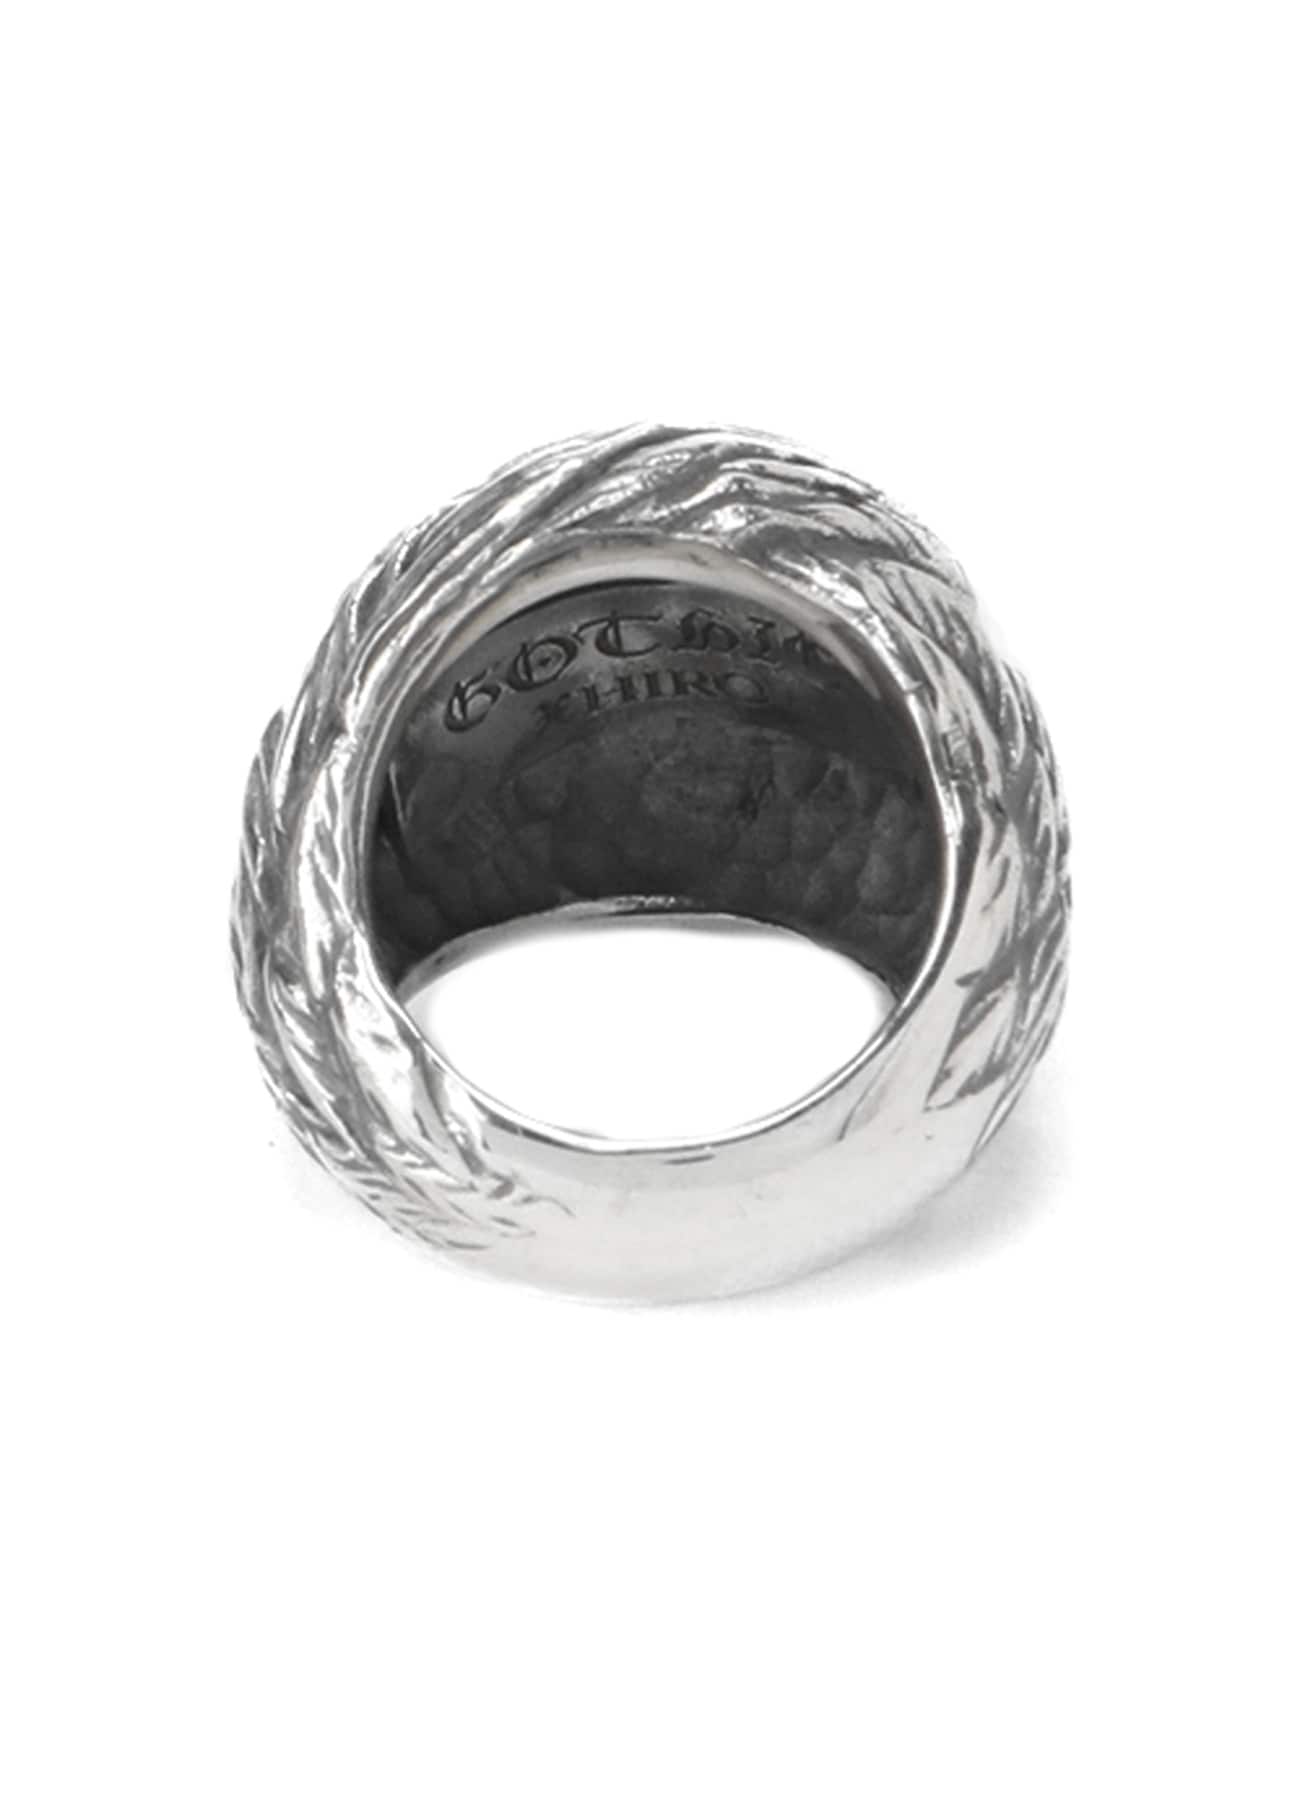 SILVER 950 EAGLE RED EYE RING